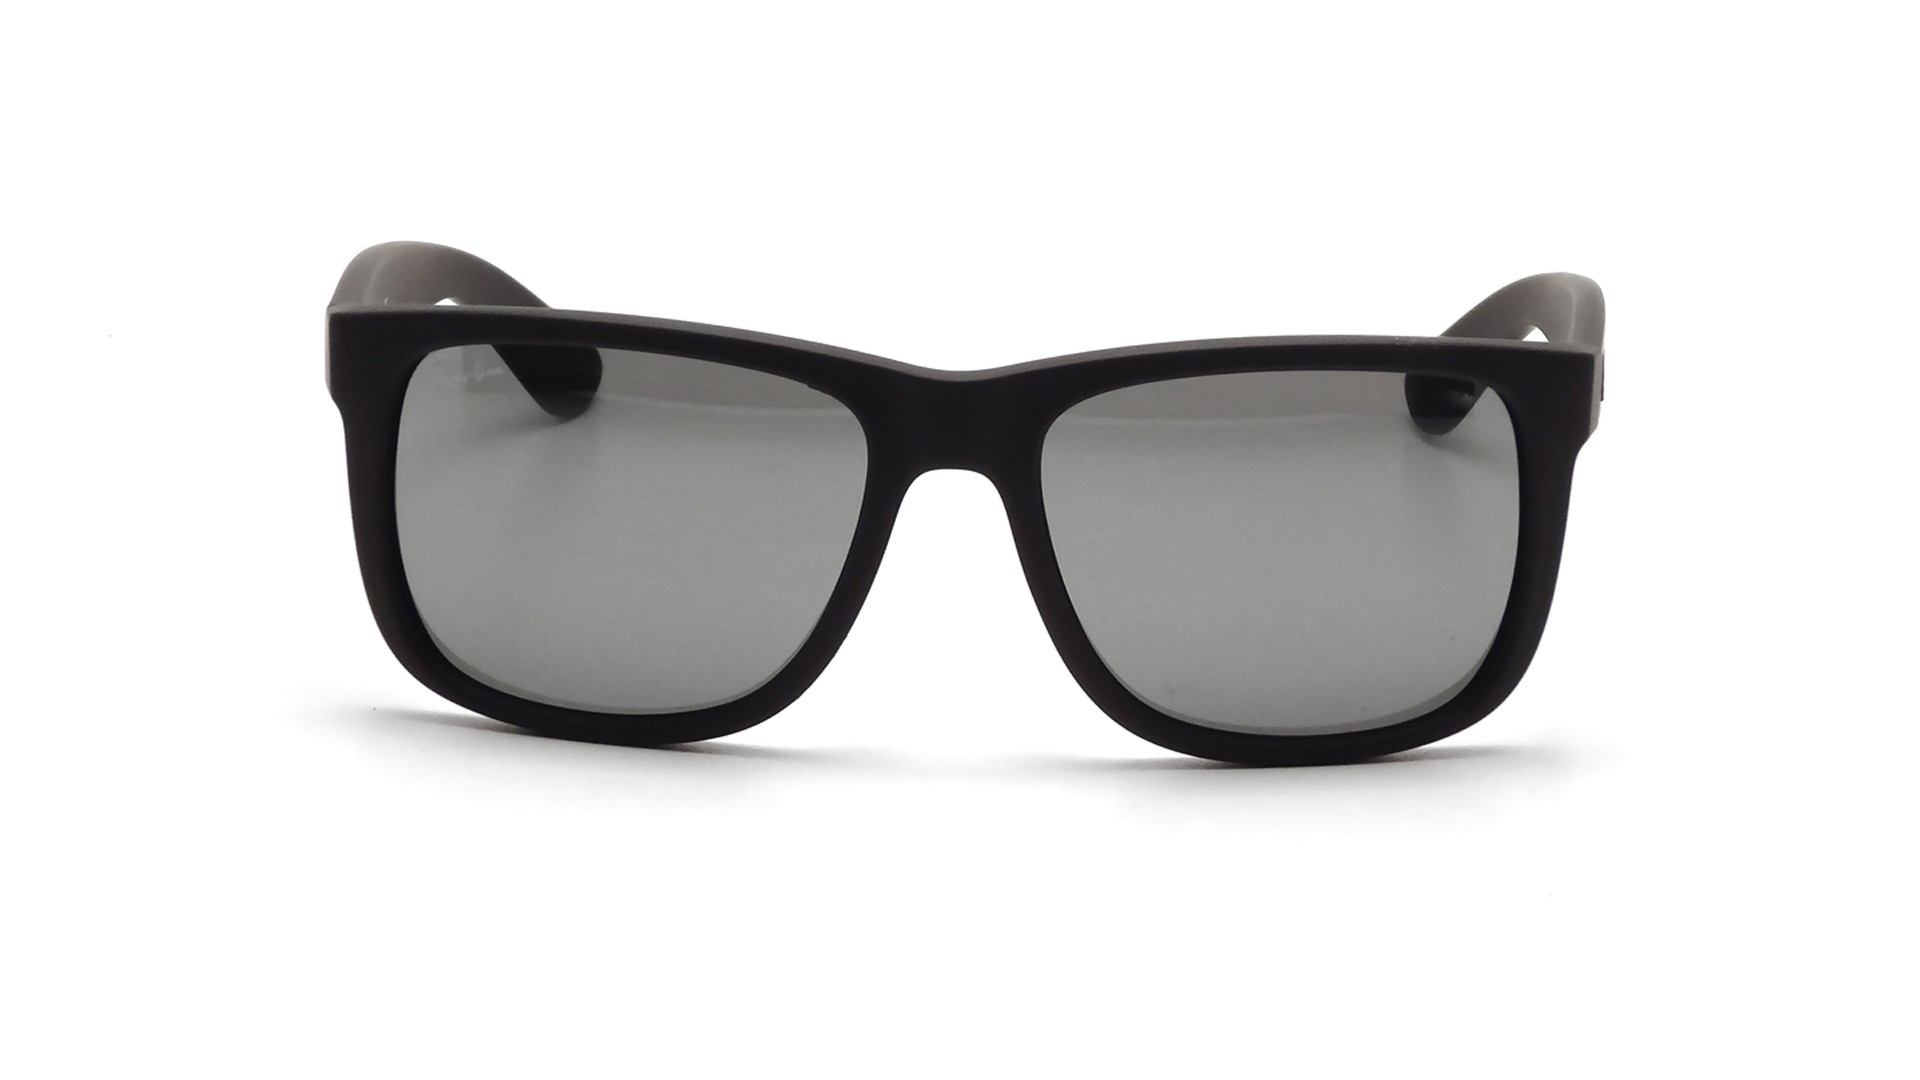 Sunglasses Ray-Ban Justin Black RB4165 622/6G 51-16 Mirror in stock ...